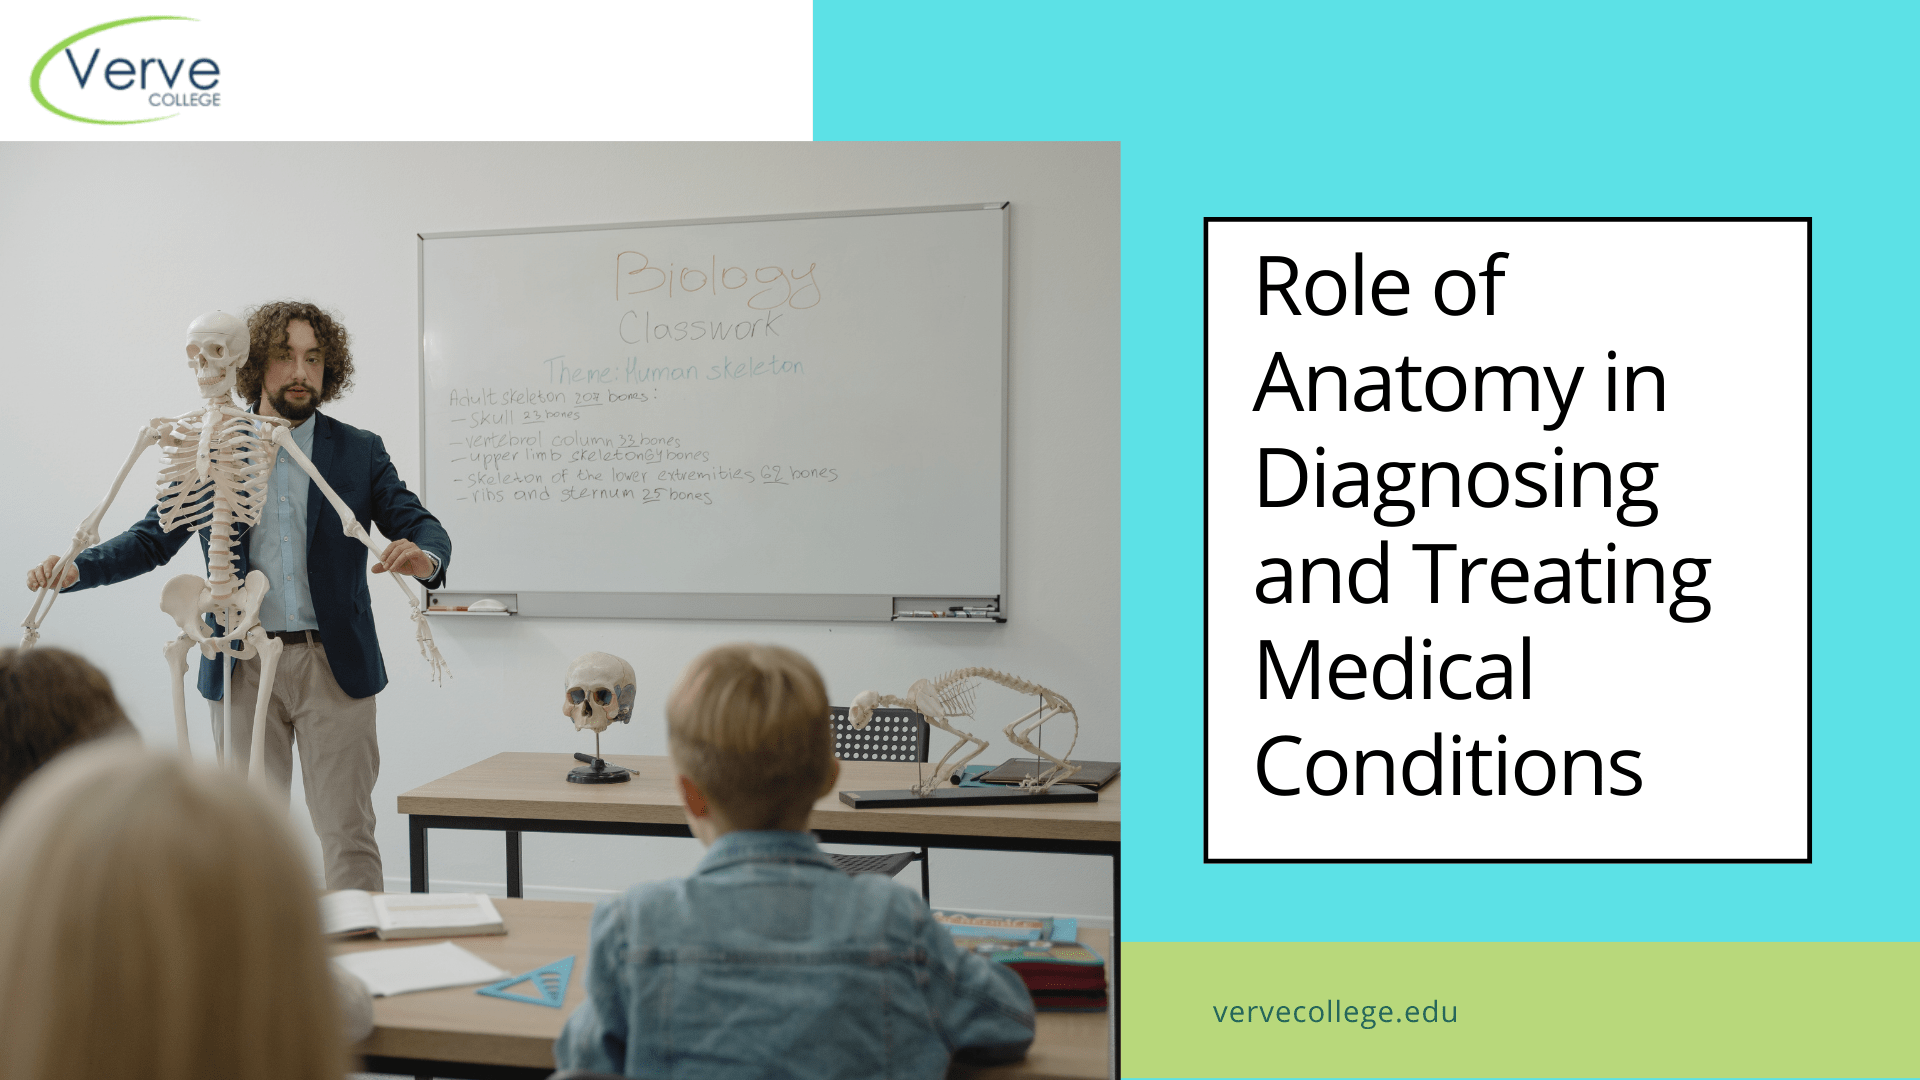 Role of Anatomy in Diagnosing and Treating Medical Conditions